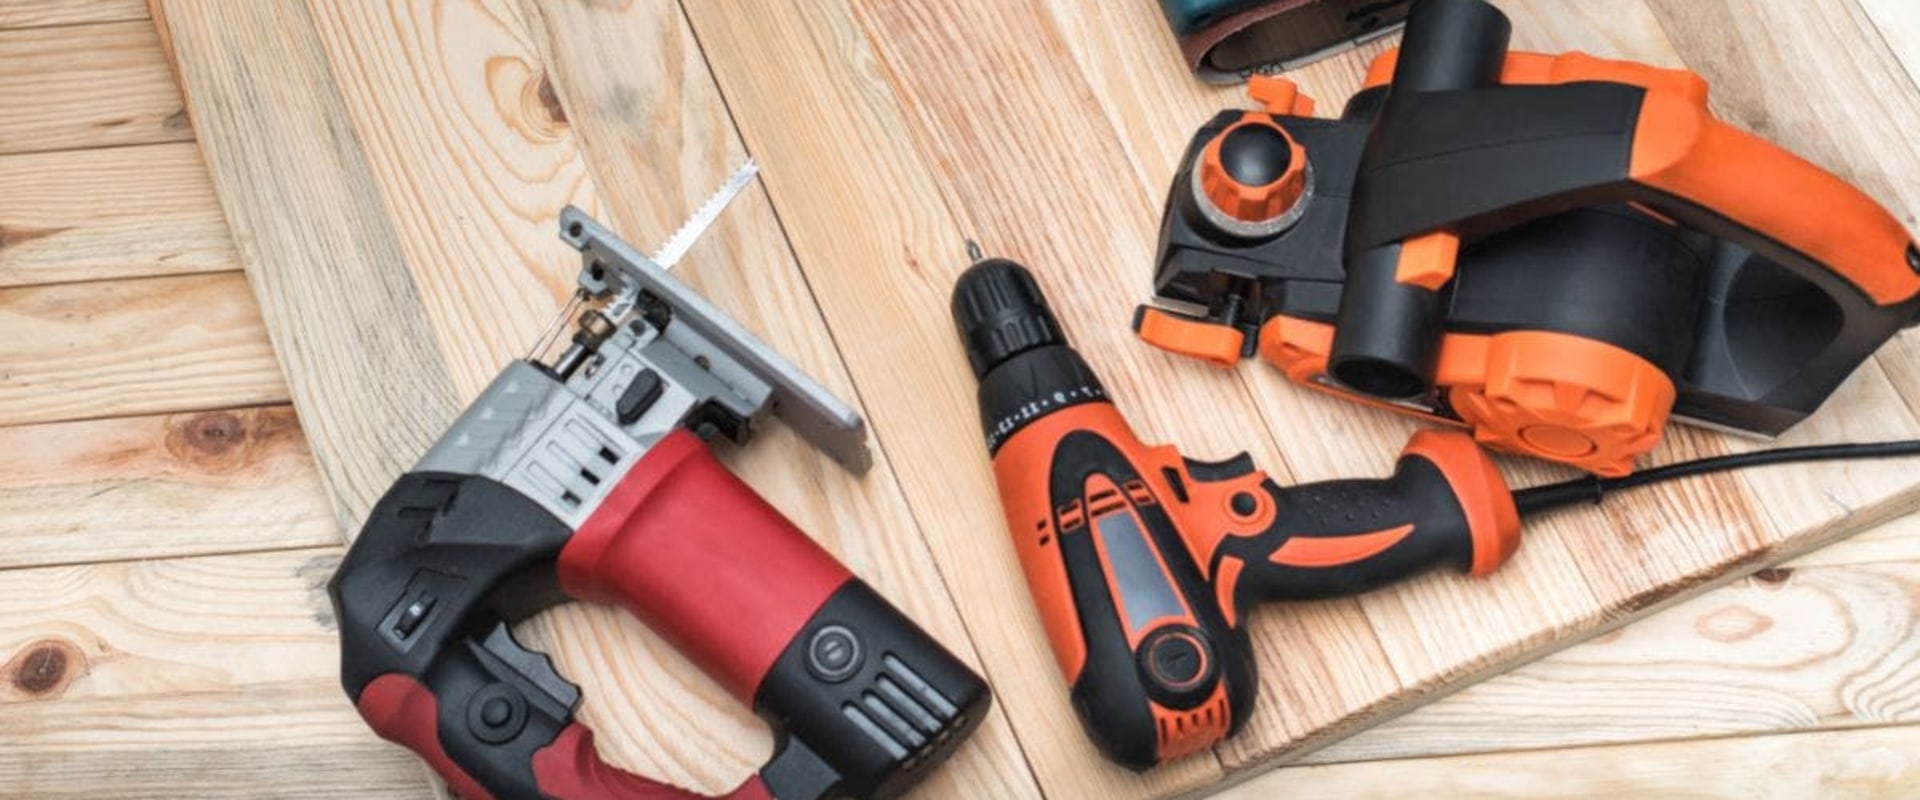 How to Choose the Right Power Tools for Your DIY Home Improvement Project